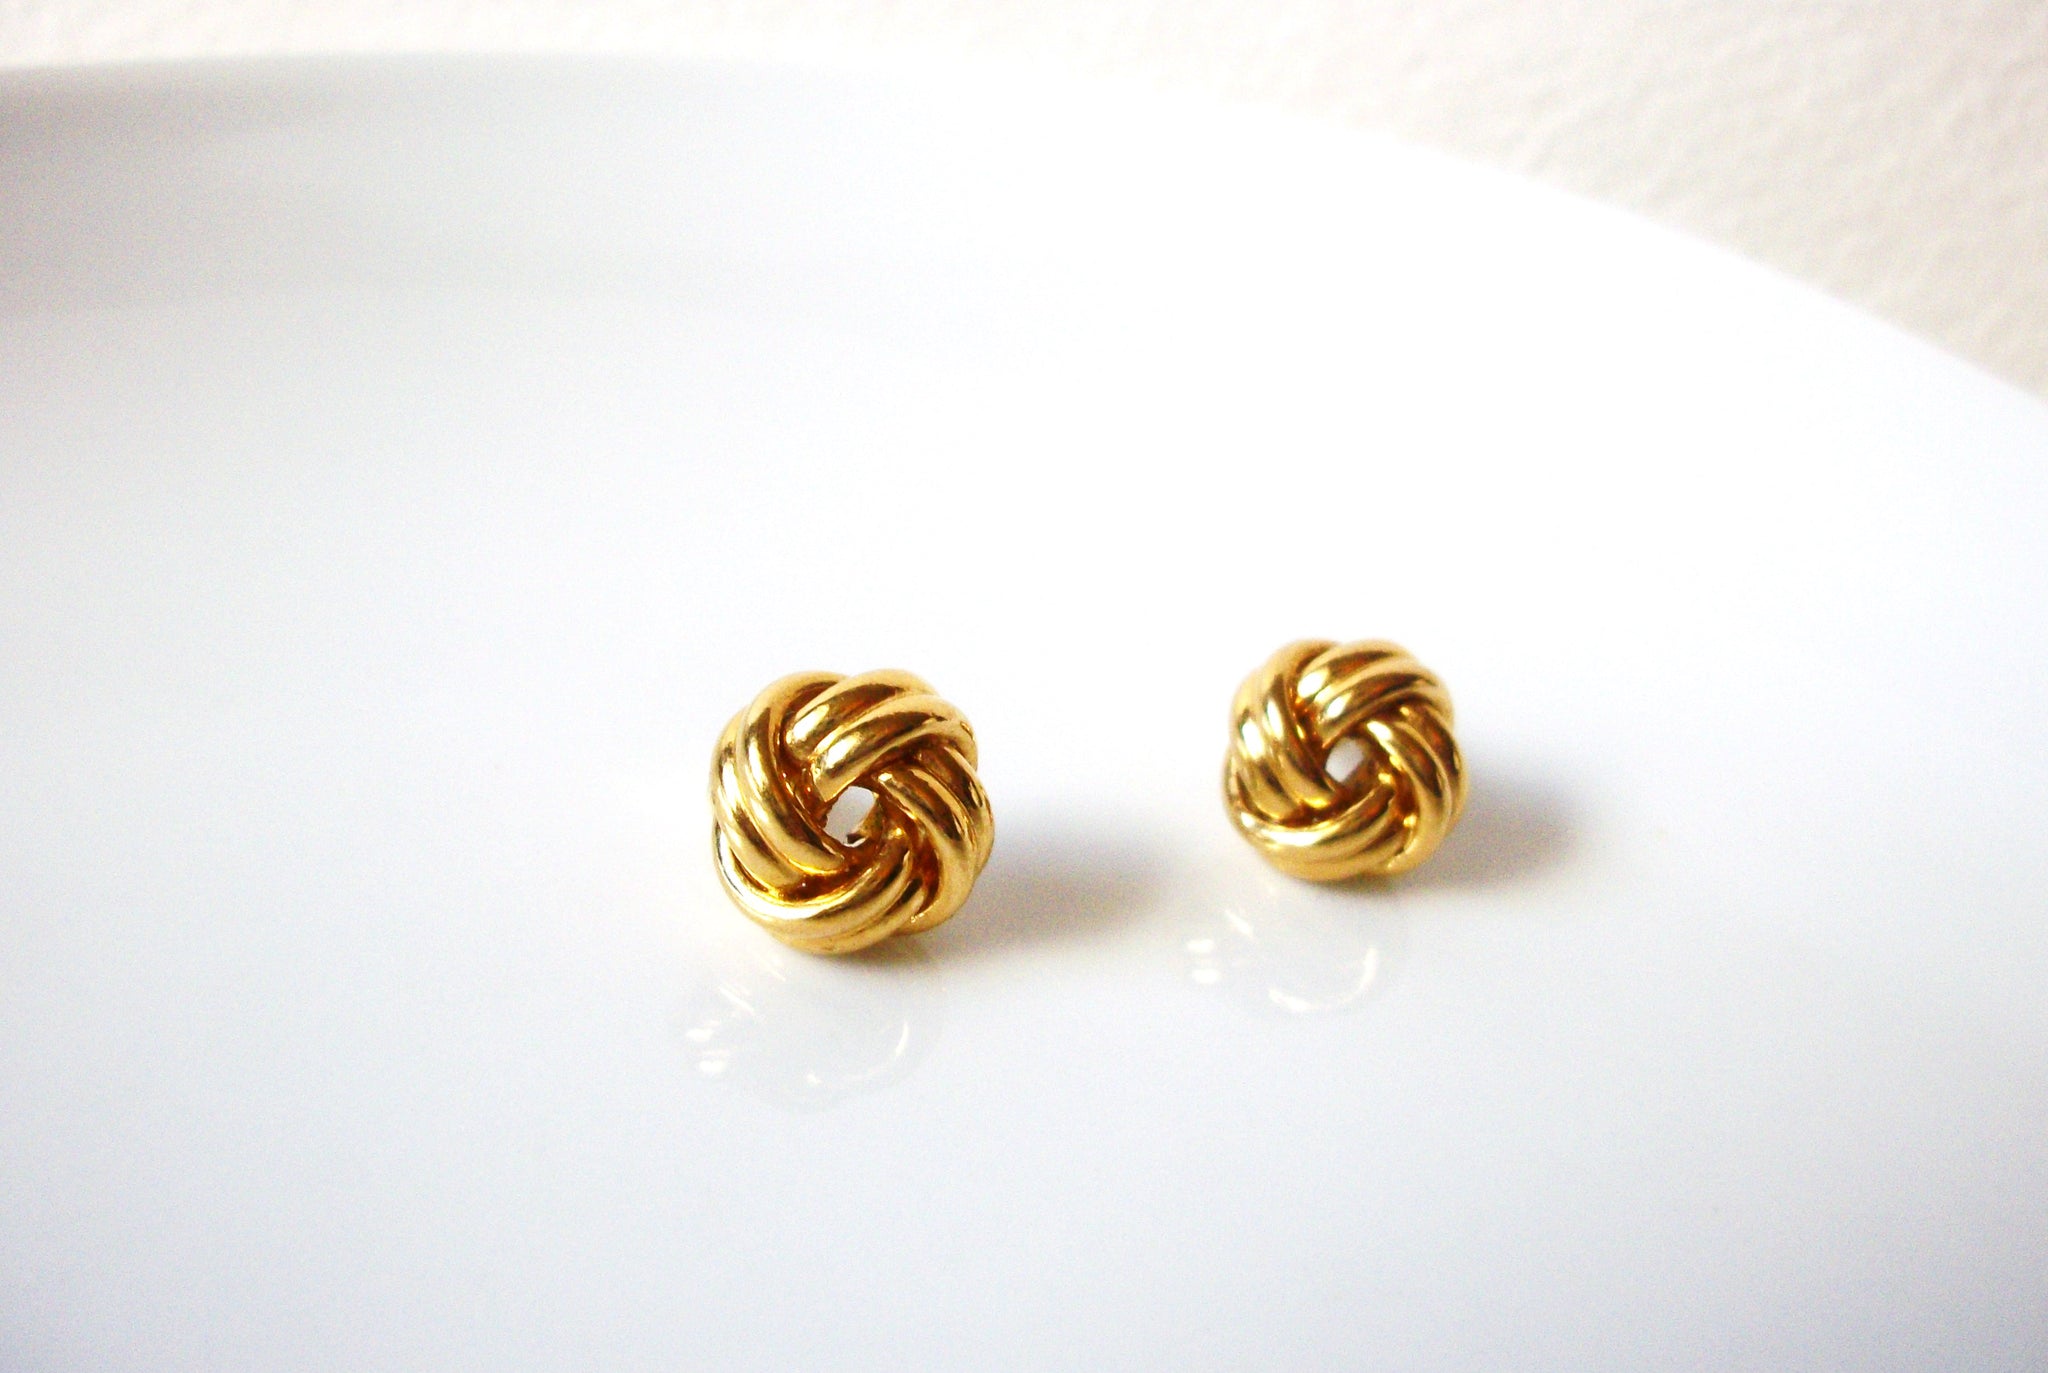 Vintage Small Gold Toned Knotted Stud Earrings 82217